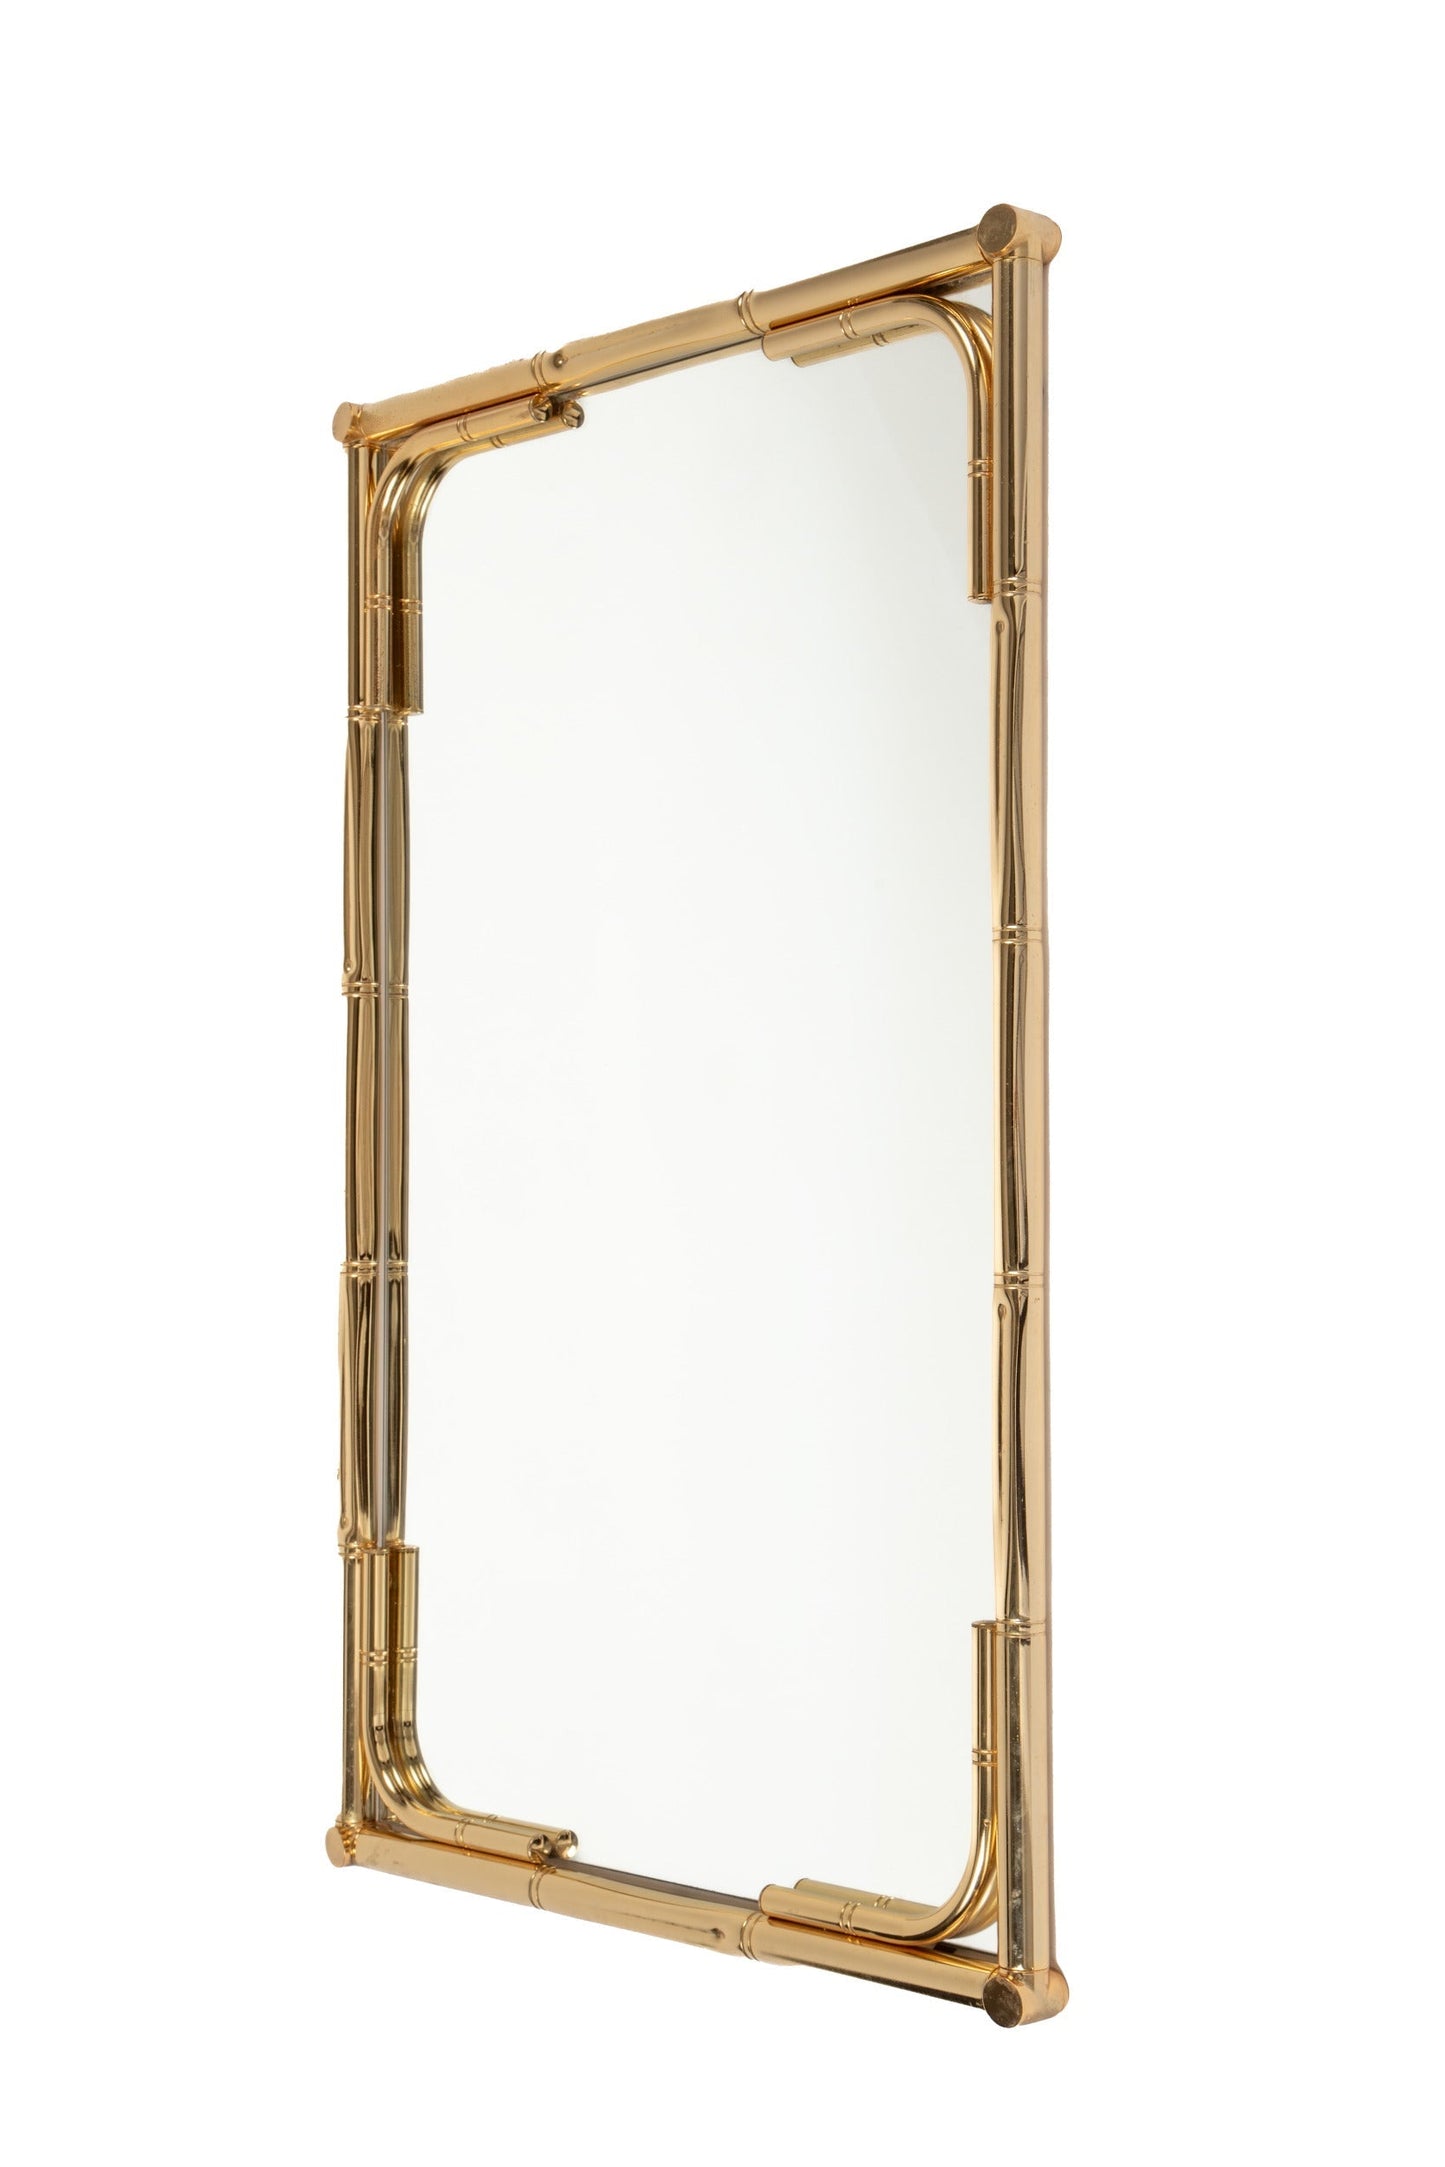 Rectangular bamboo-shaped brass mirror from the 70s